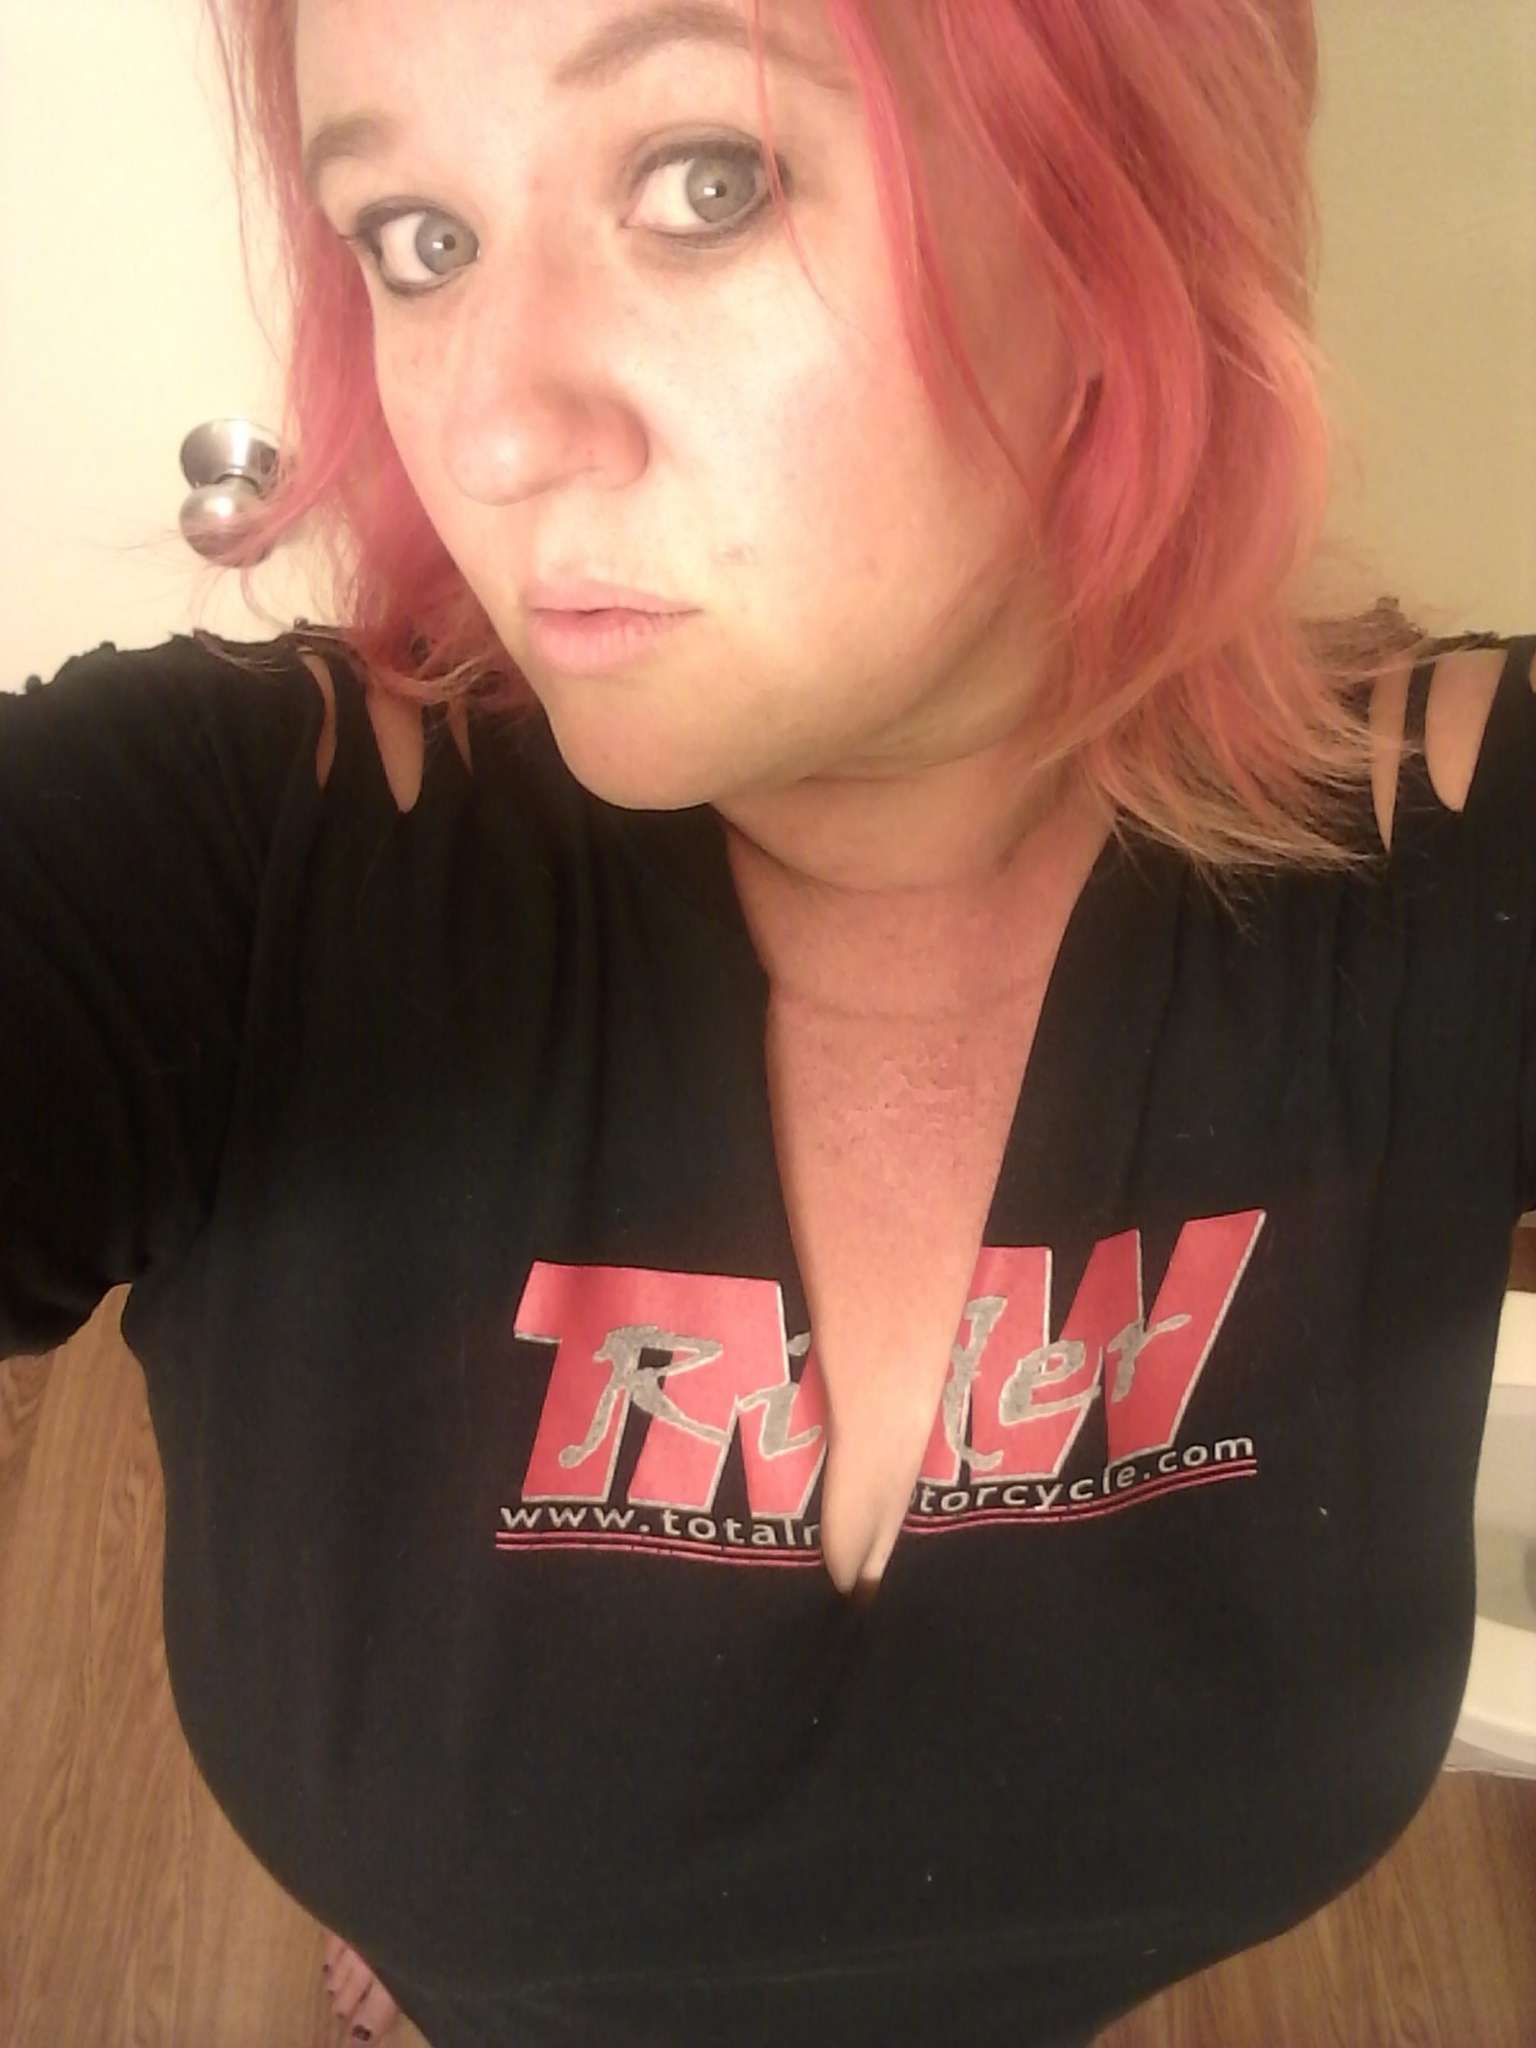 Indian Women's review, A woman with red hair and blue eyes stands barefoot wearing a trendy slashed black t-shirt with the TMW logo. Her makeup is smudged, her hair is mussed and her upper chest appears to be severely sunburned and peeling. 